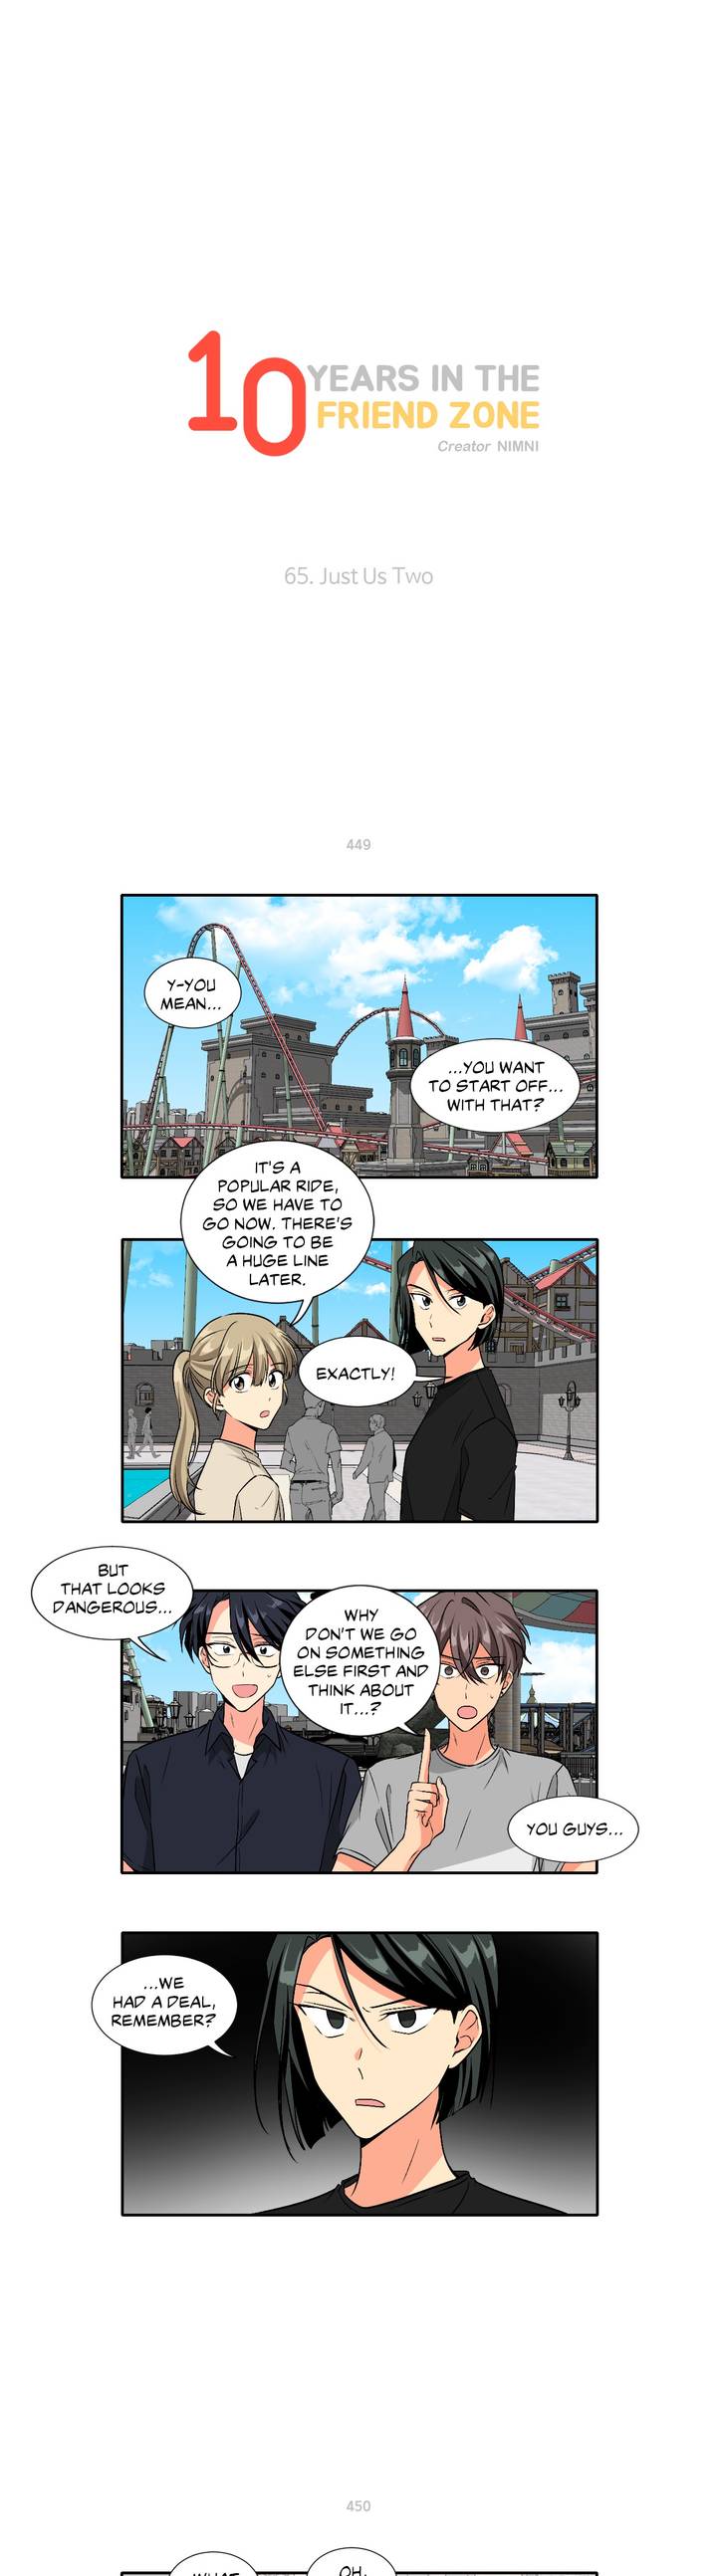 10 Years in the Friend Zone Ch.65